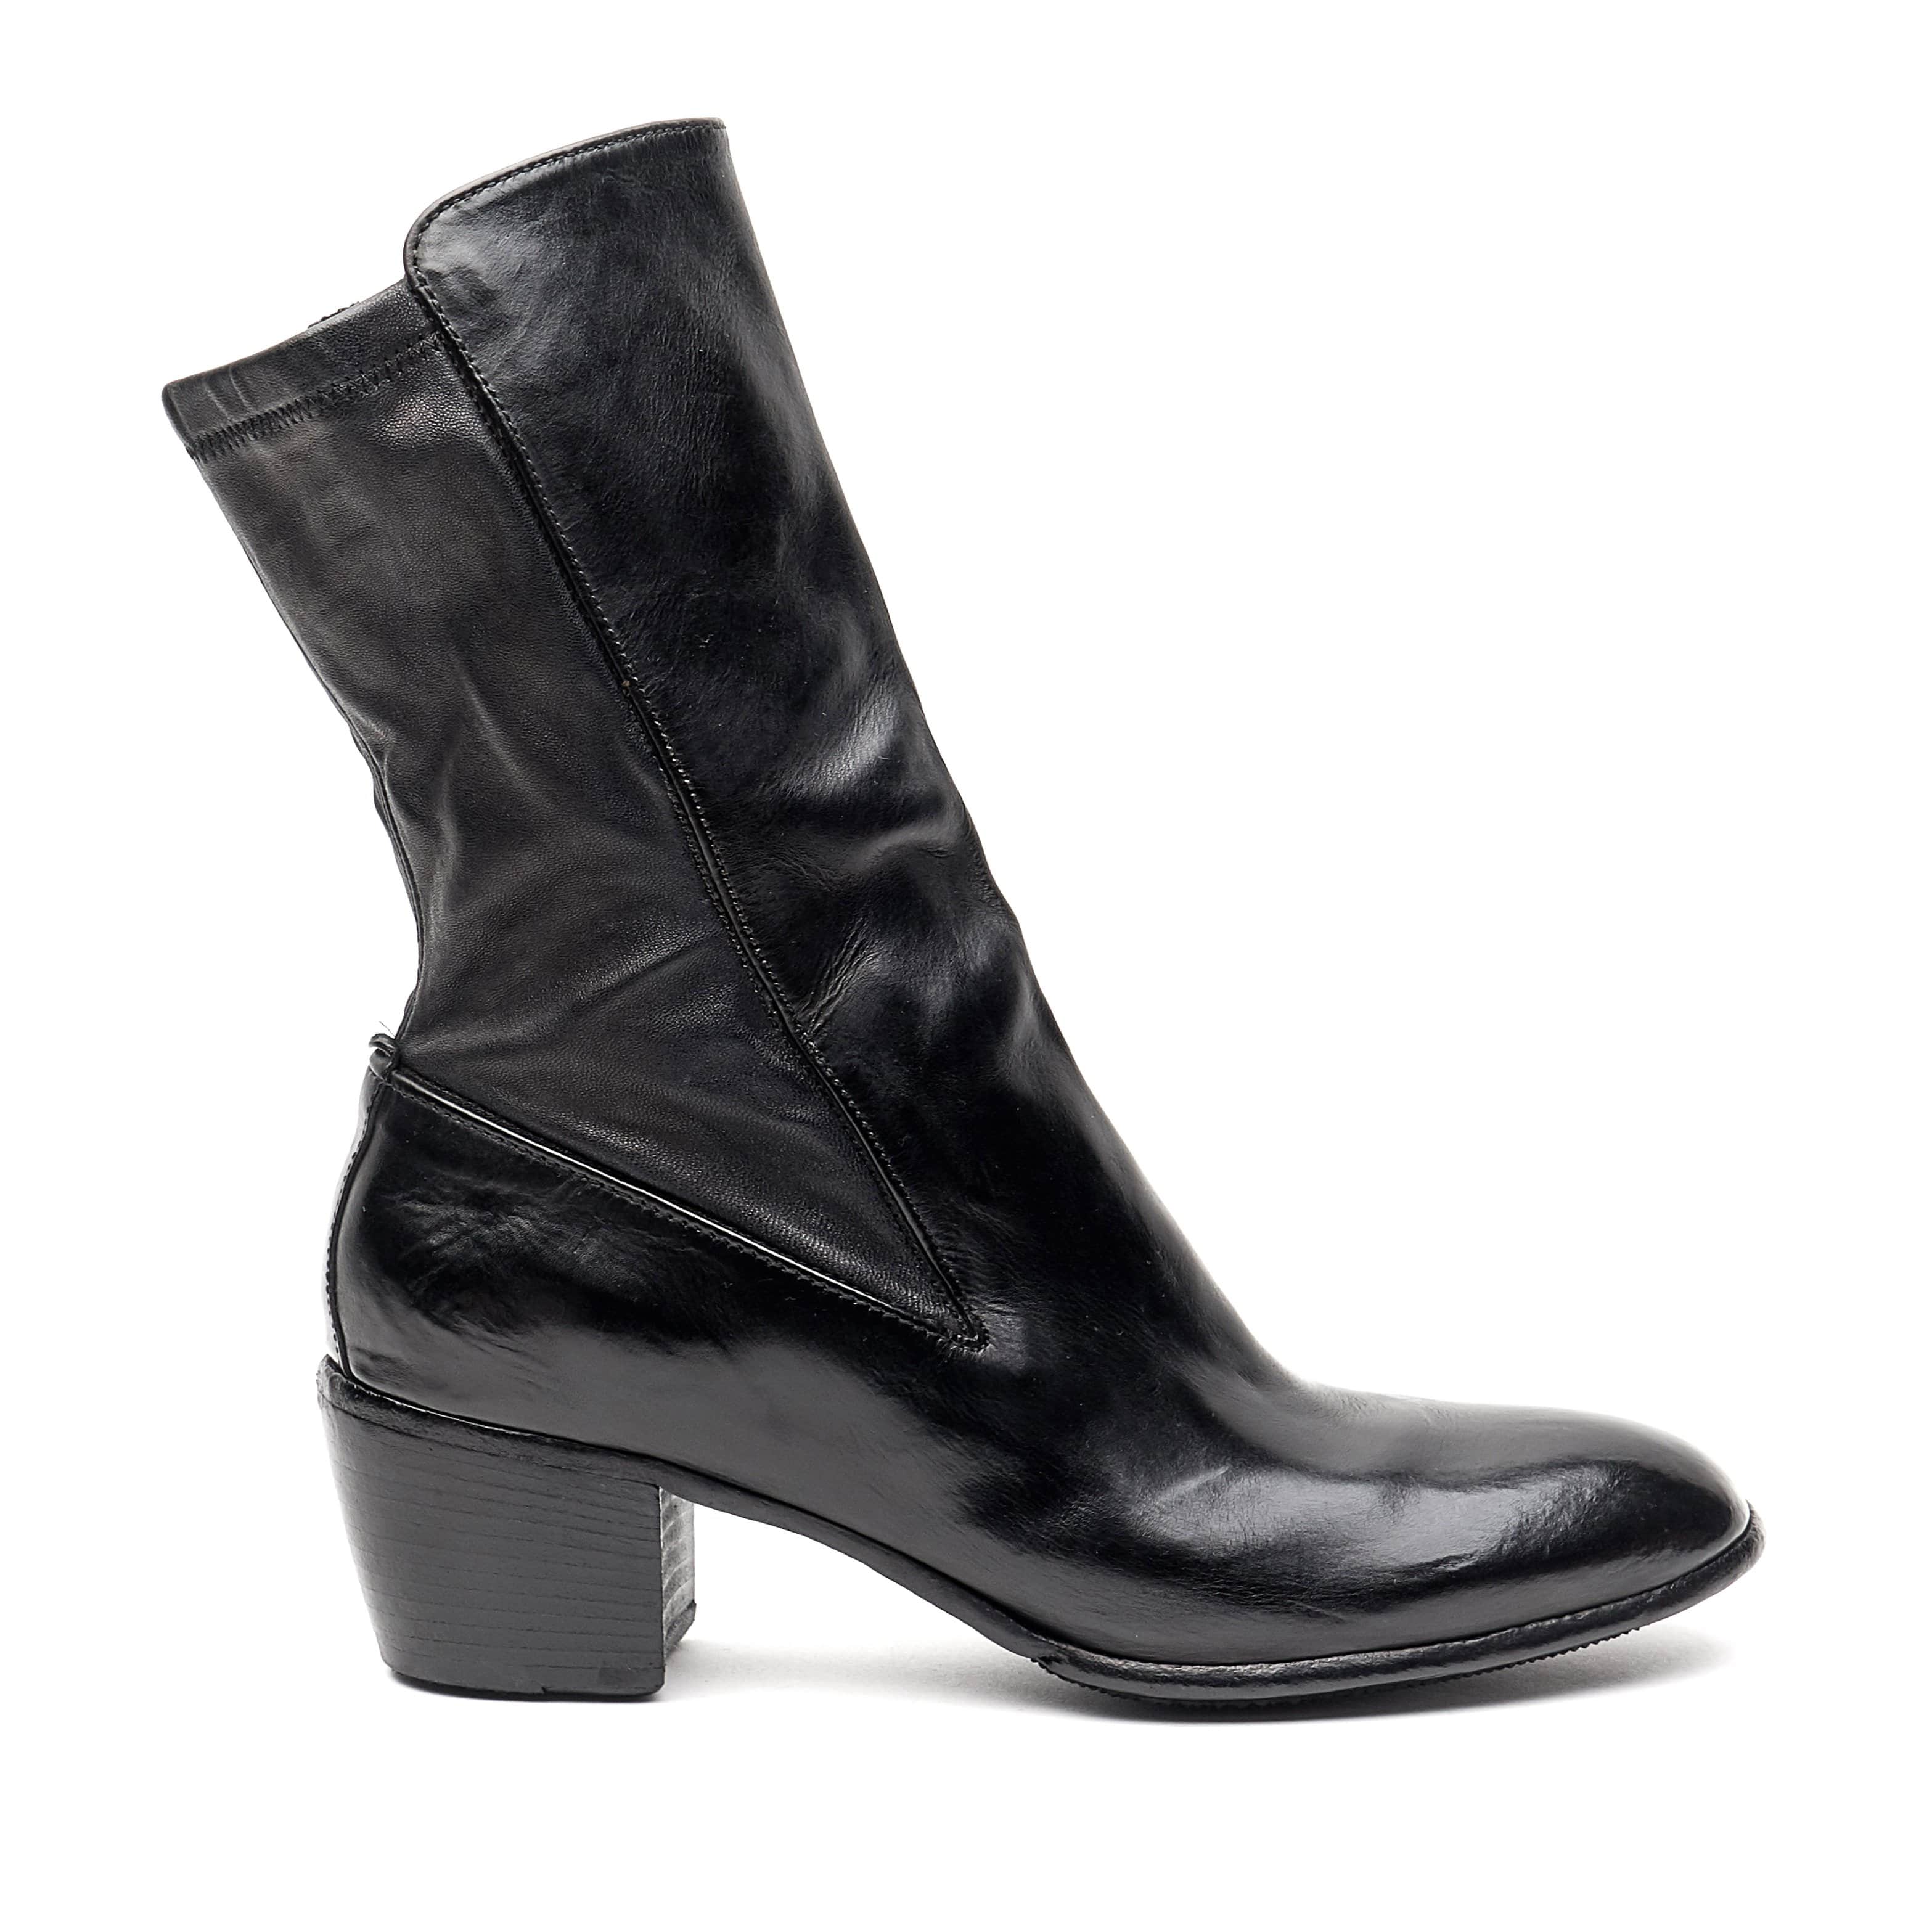 Lemargo AH13A Womens Ankle Boot - 124 Shoes